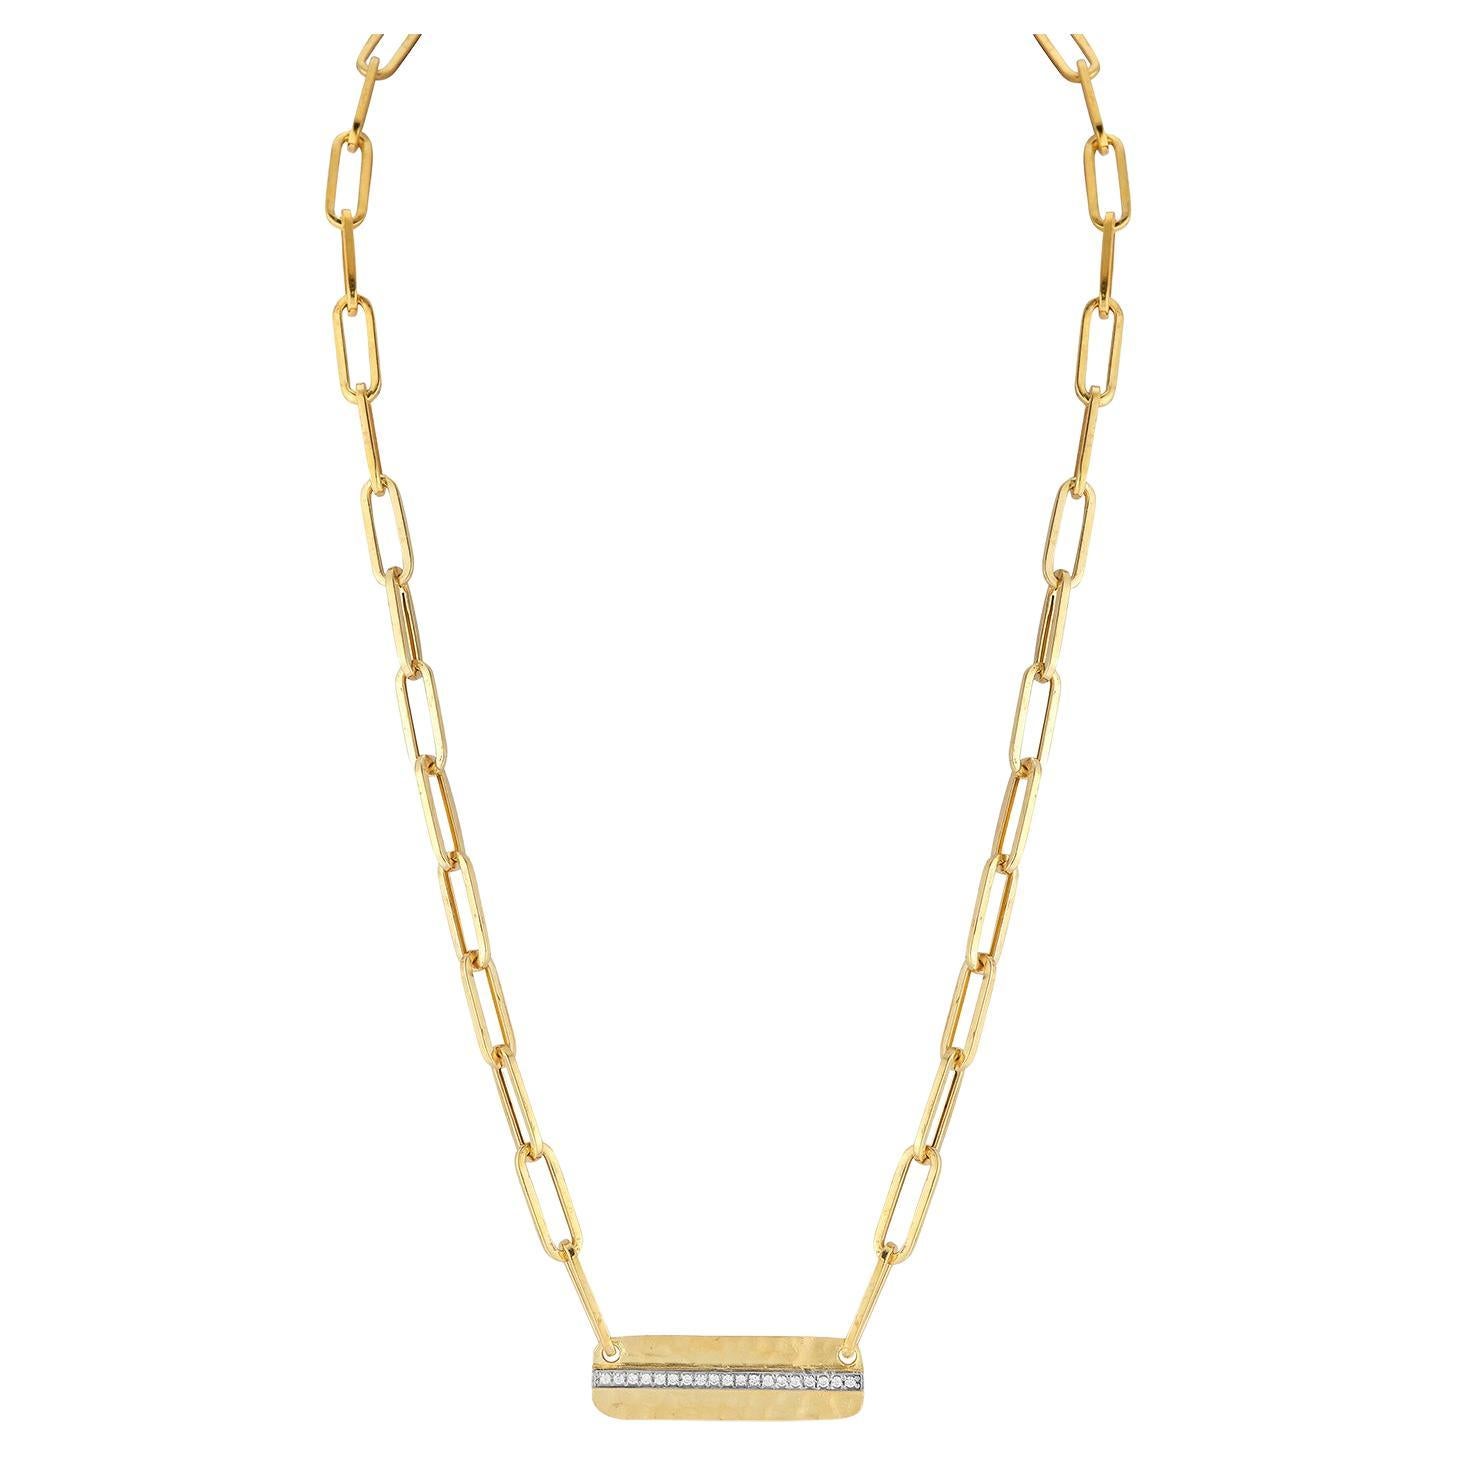 Craftted 14K Yellow Gold Open Link Dog Tag Necklace en vente